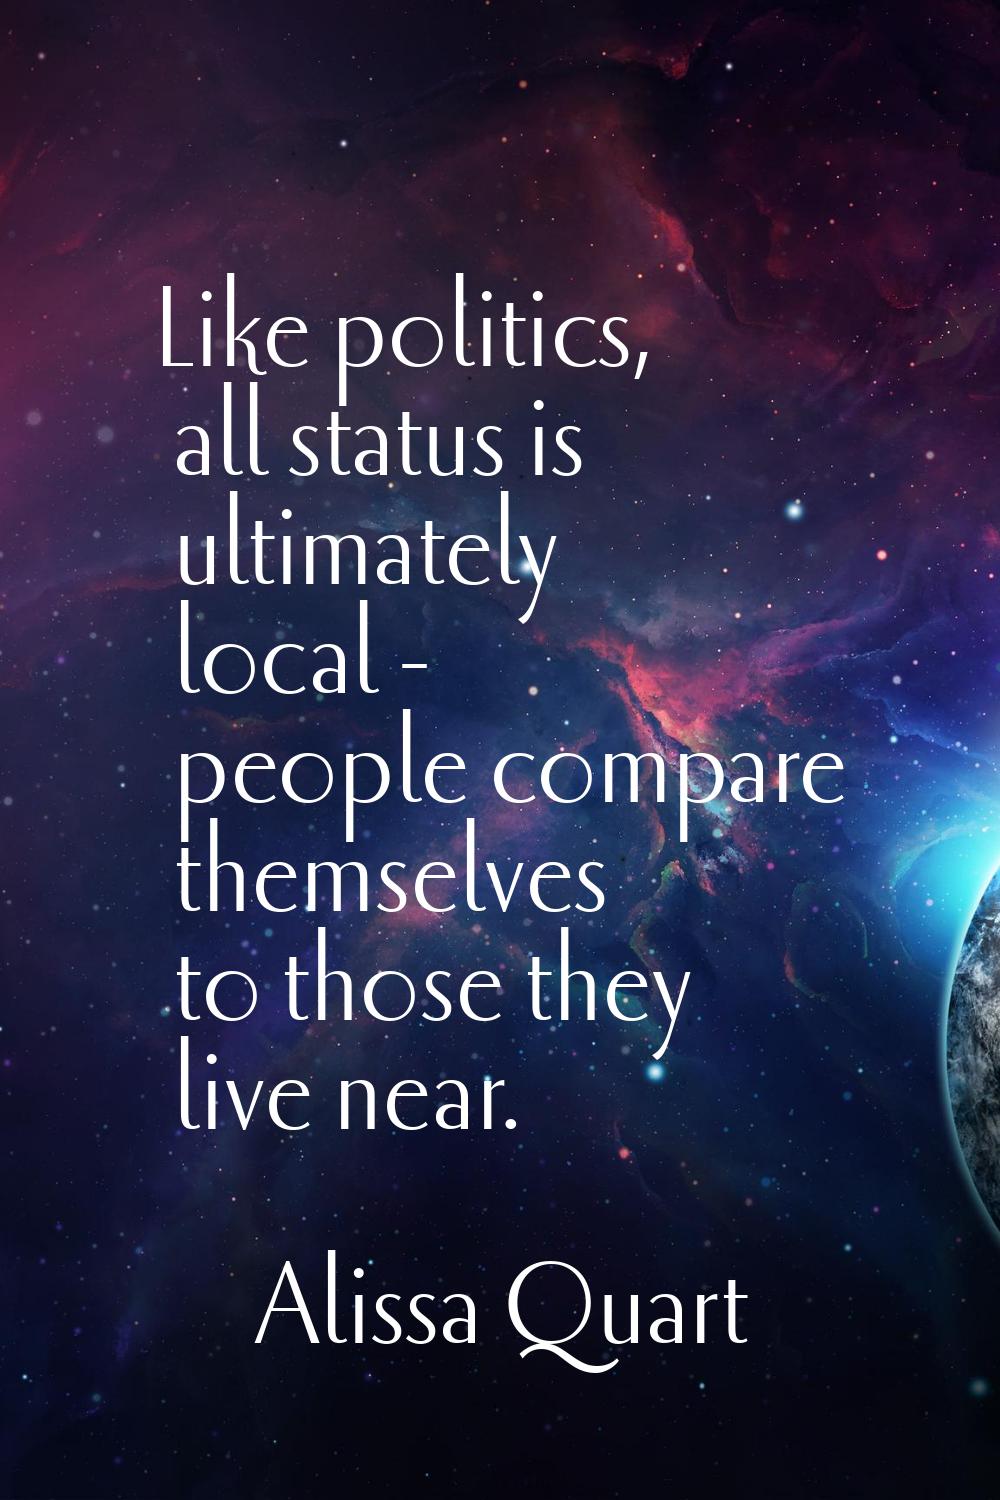 Like politics, all status is ultimately local - people compare themselves to those they live near.